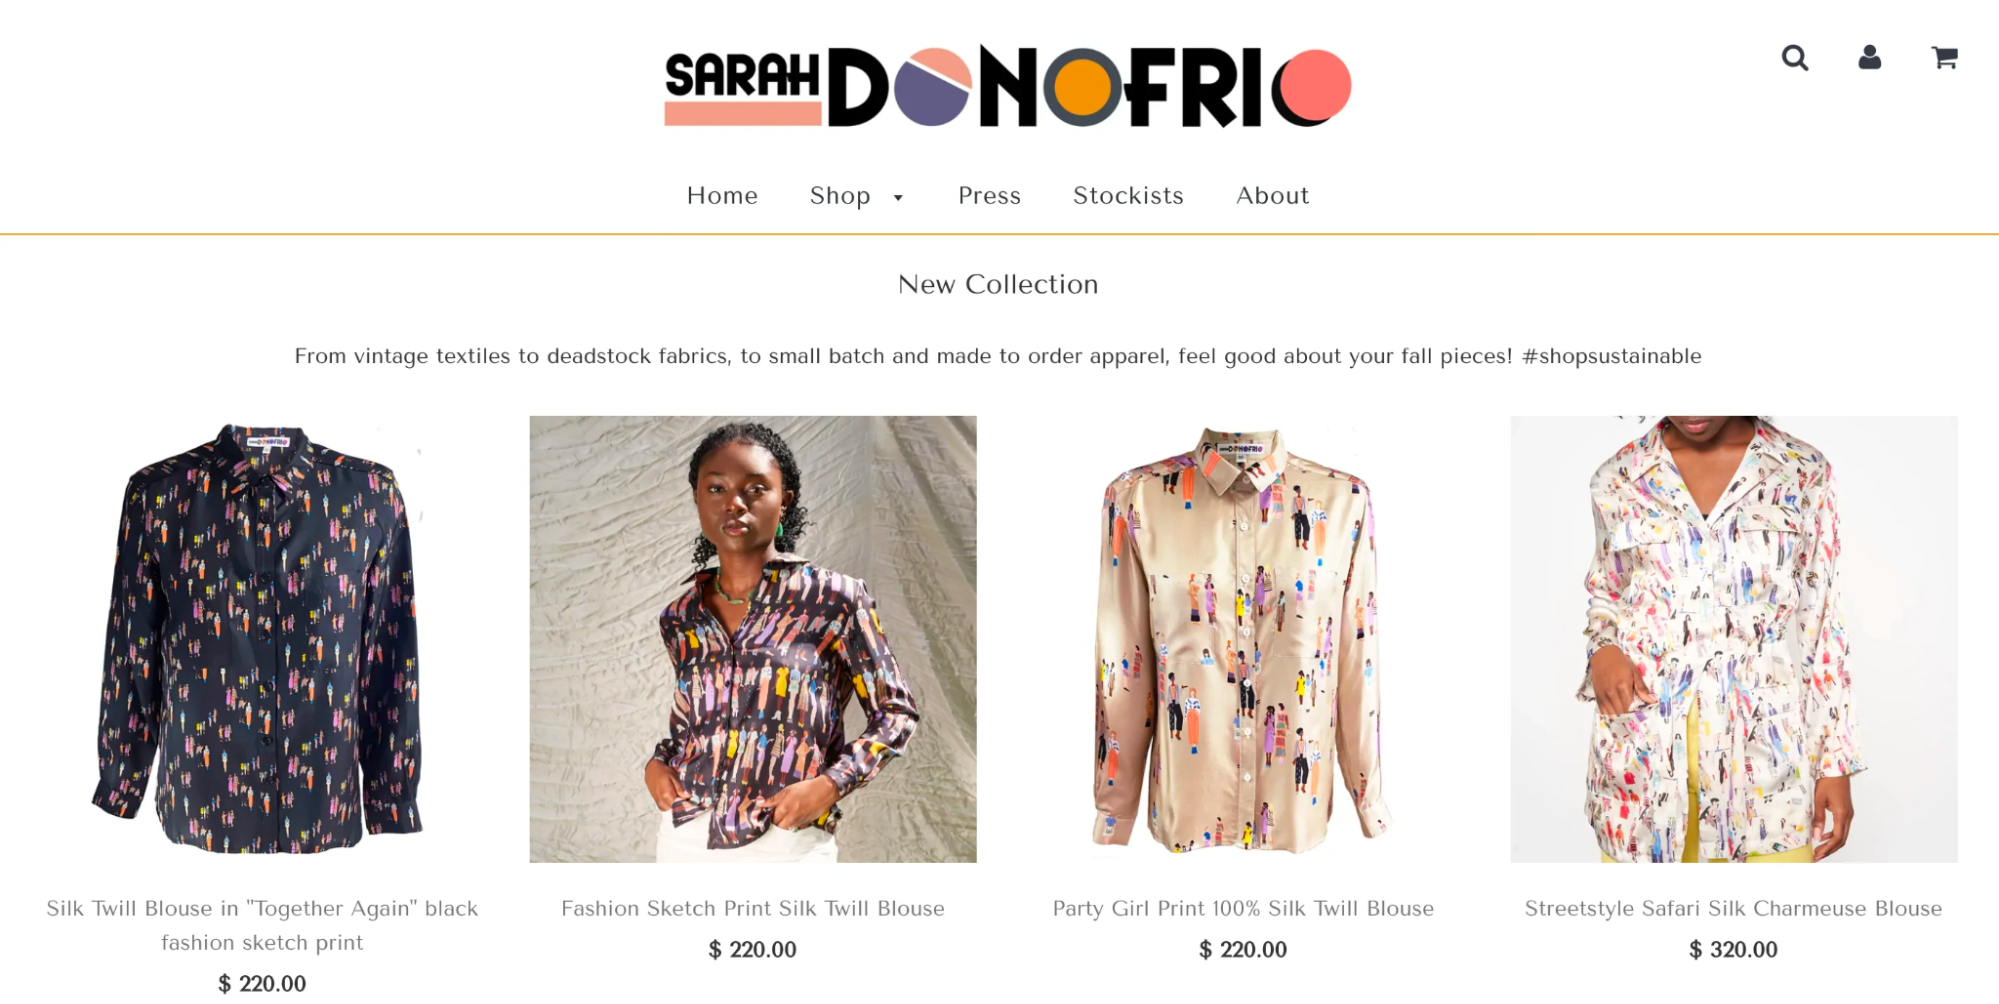 Image of products Sarah Donofrio designs and sells through her online store